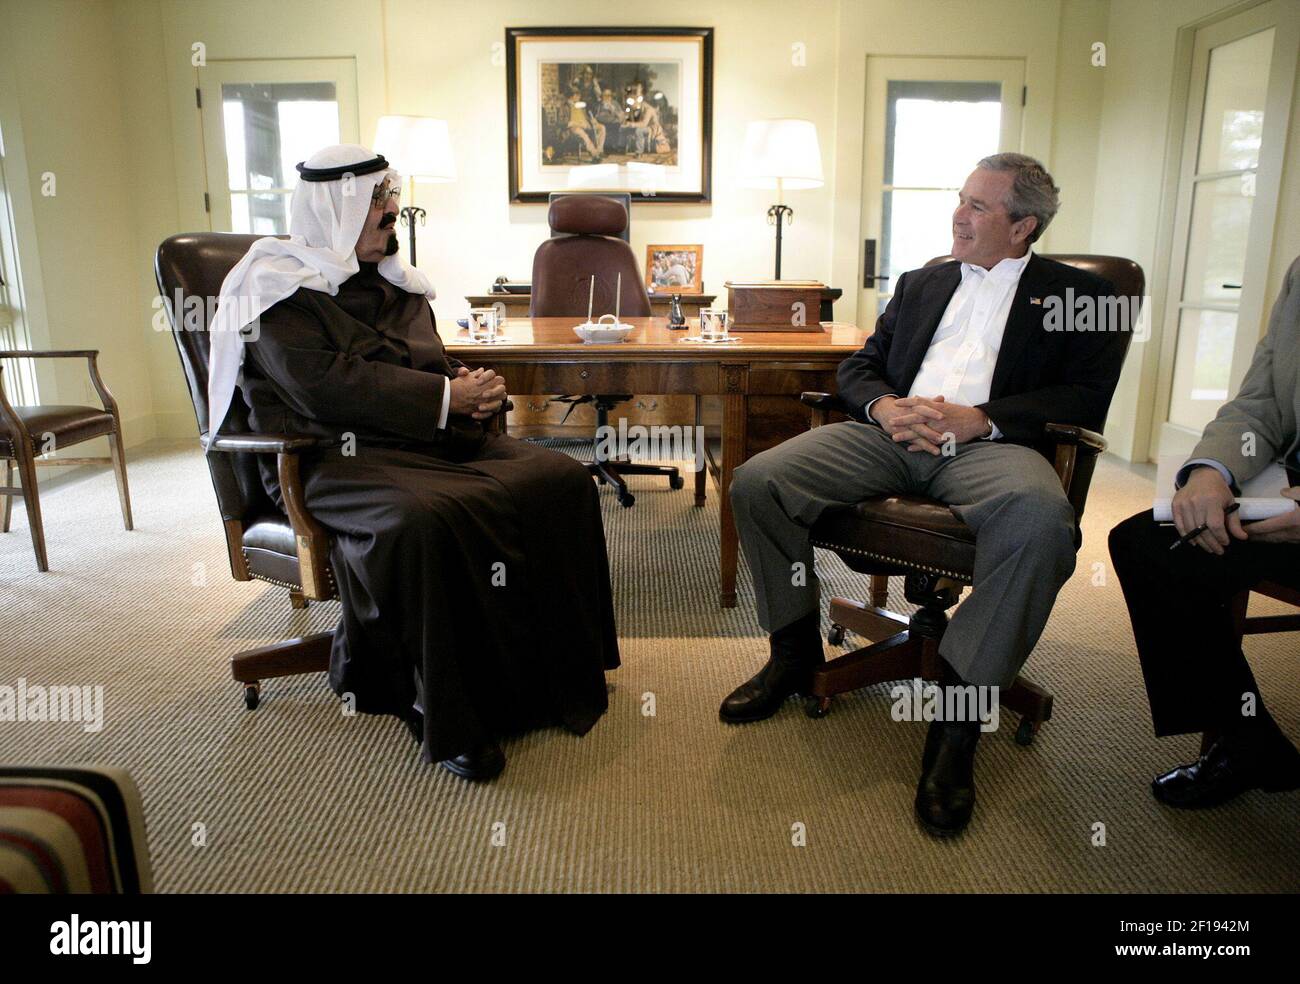 FOR USE WITH RELATED KRT US NEWS STORY SLUGGED: BUSH KRT PHOTOGRAPH BY ERIC DRAPER/THE WHITE HOUSE (April 25) CRAWFORD, TX-- President George W. Bush visits with Saudi Crown Prince Abdullah Monday, April 25, 2005, at the President's ranch in Crawford, Texas. (Photo by lde) 2005 Stock Photo